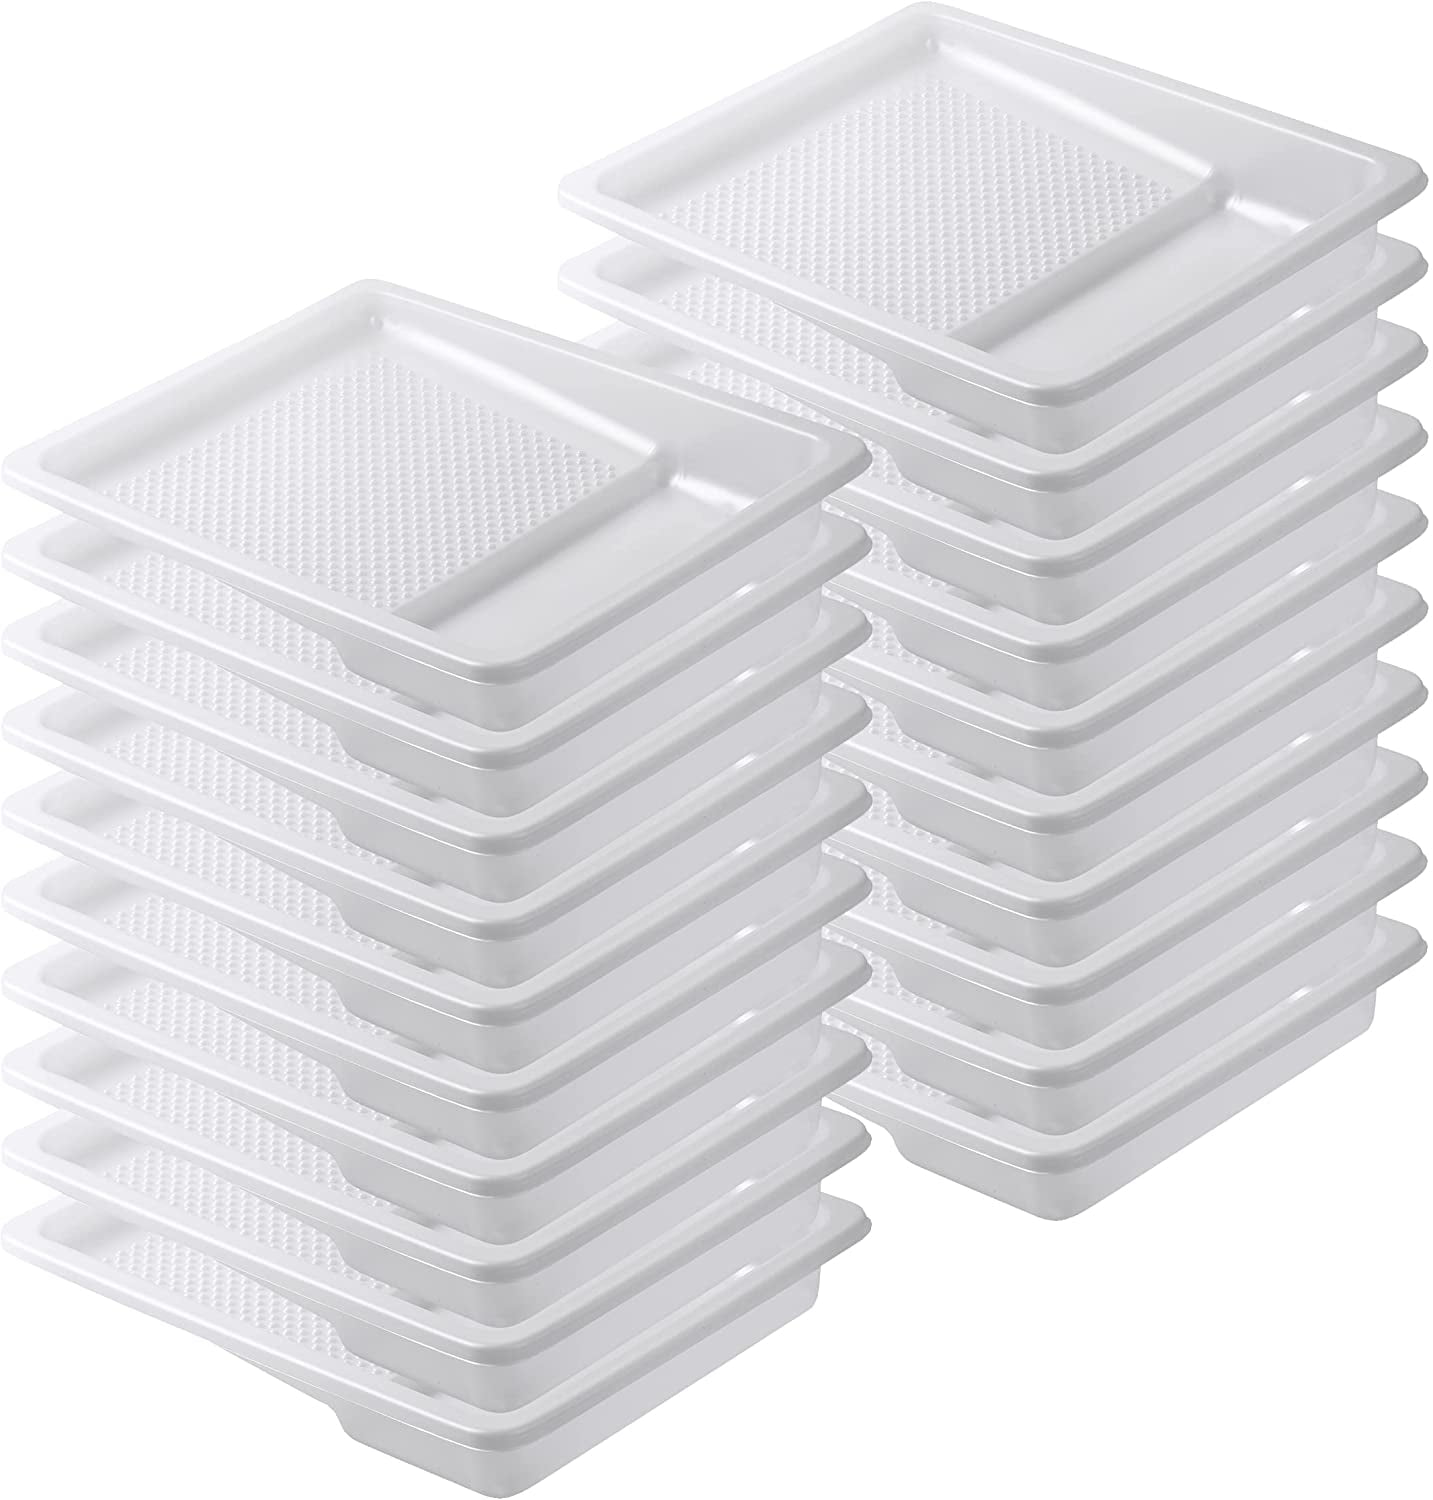 Paint Trays & Liners at